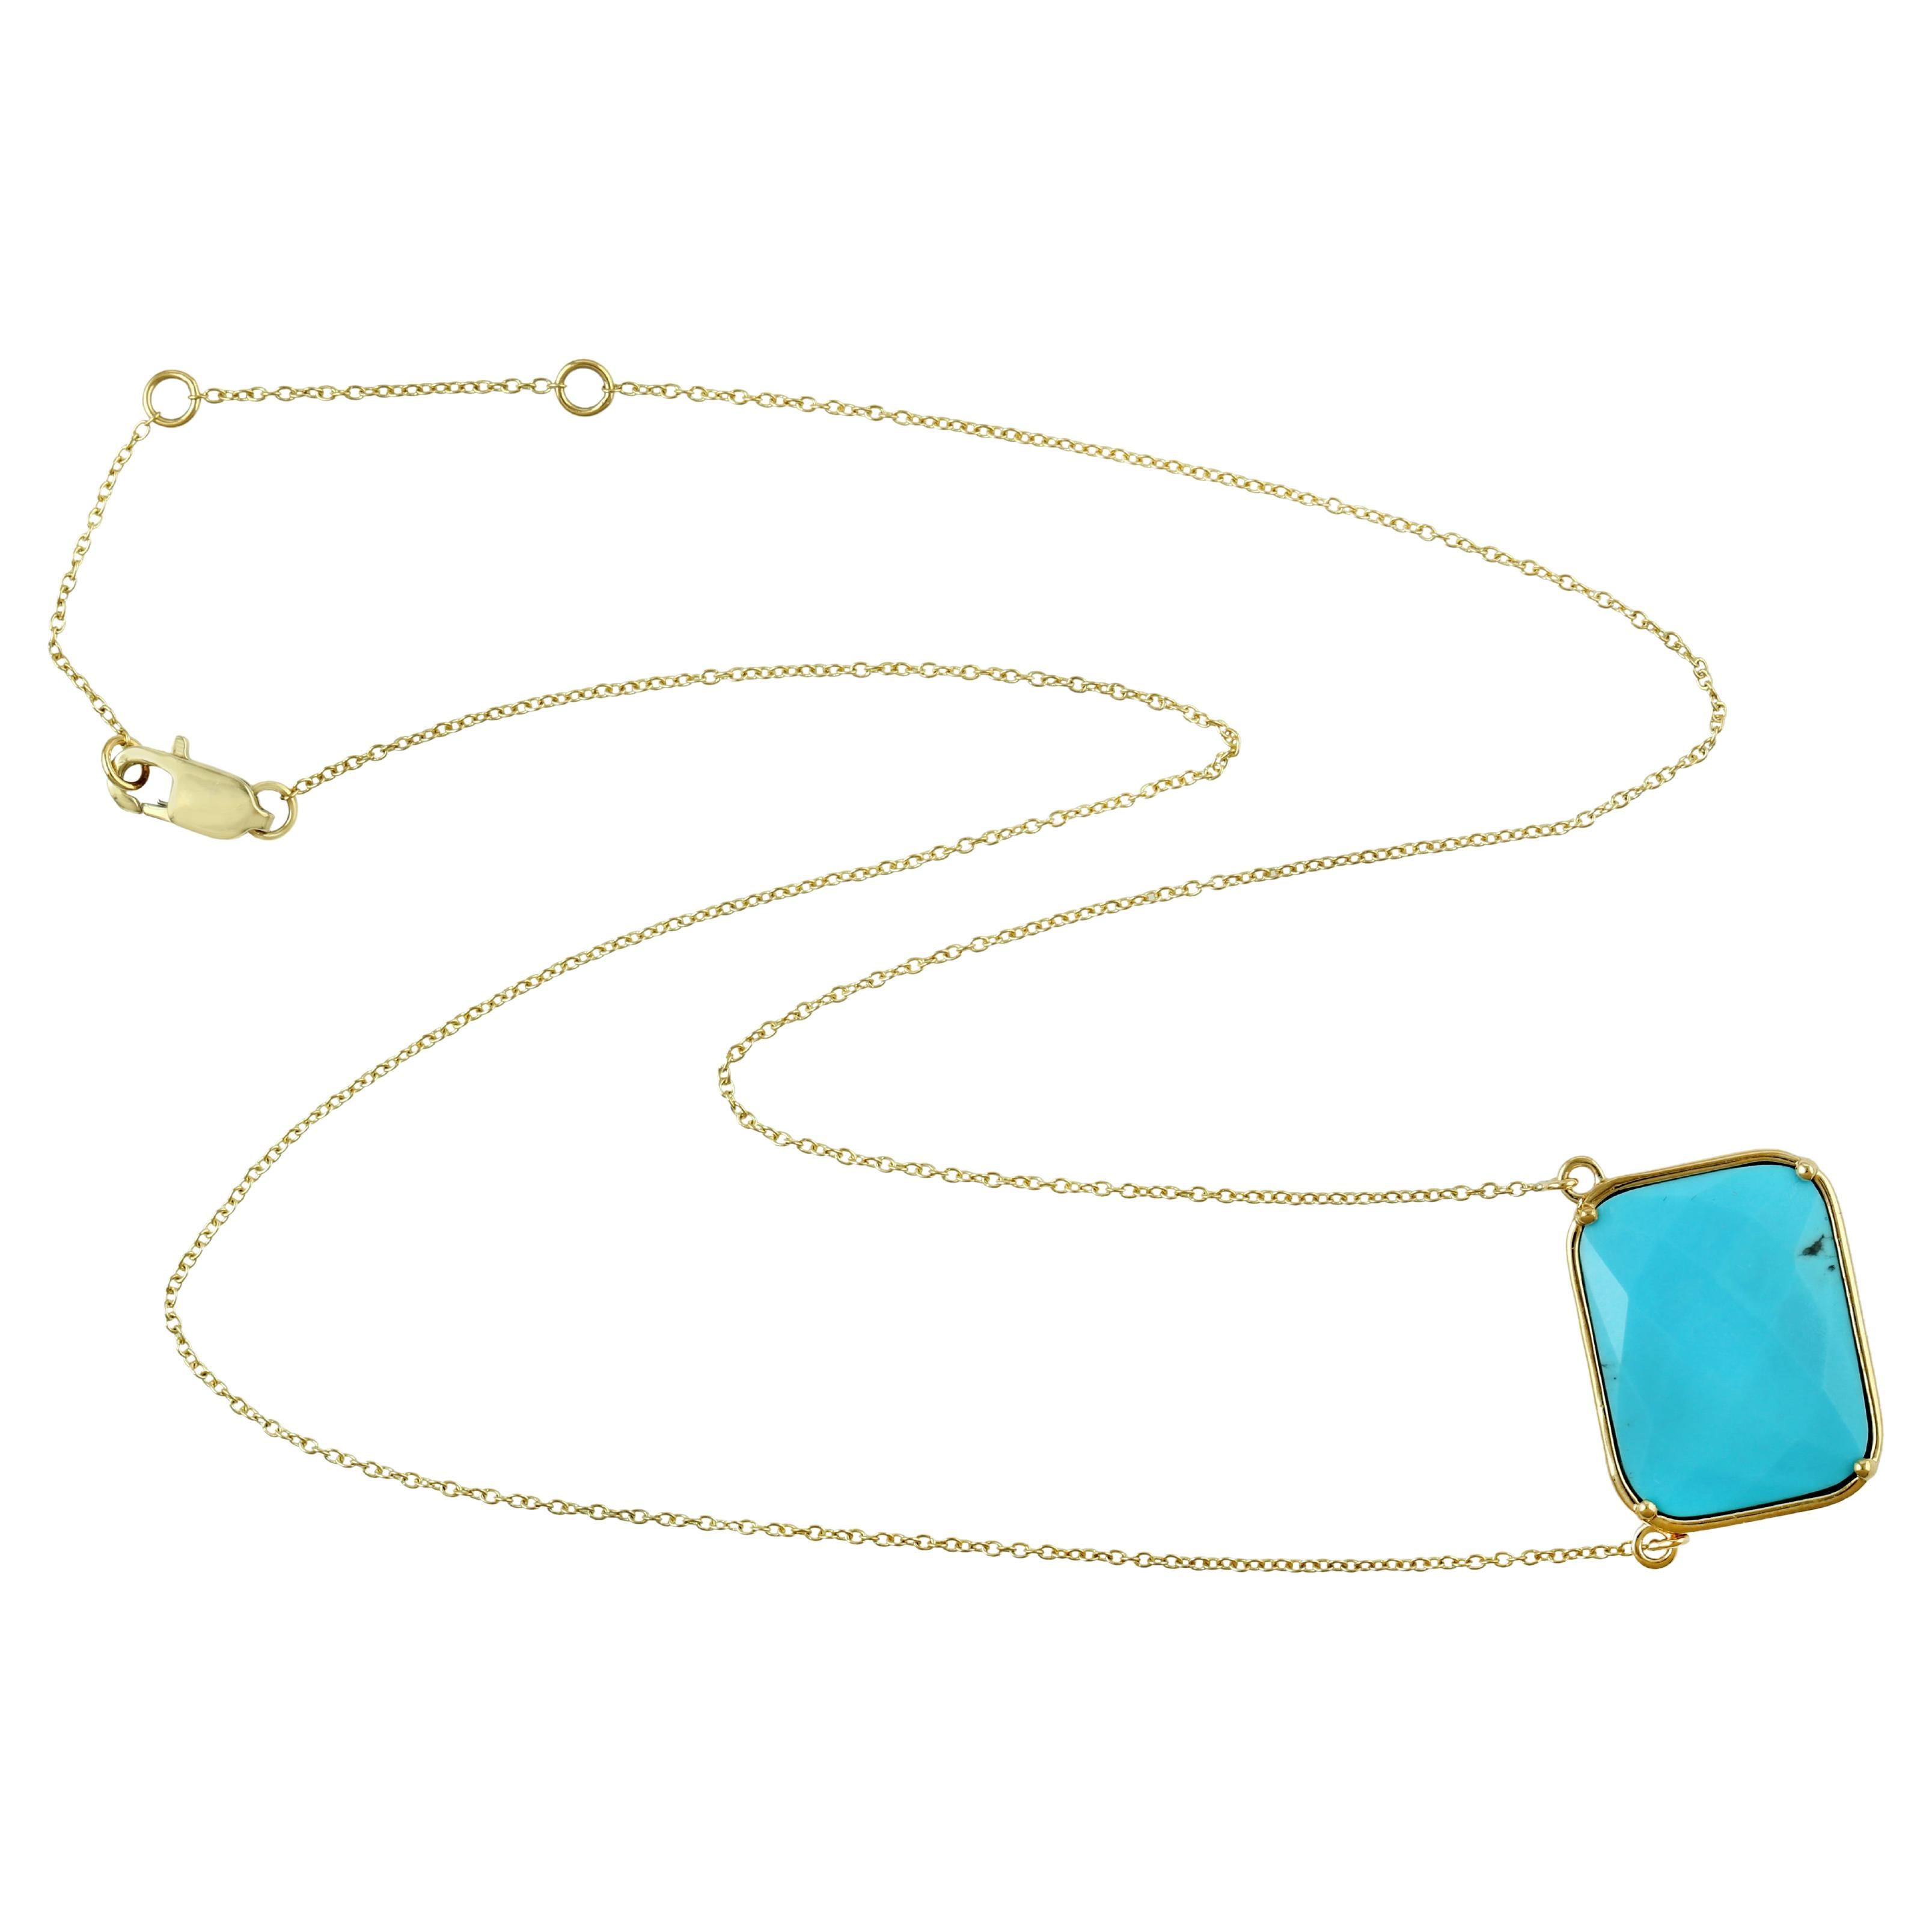 Cushion Shaped Blue Turquoise Pendant Necklace Made In 18K Yellow Gold